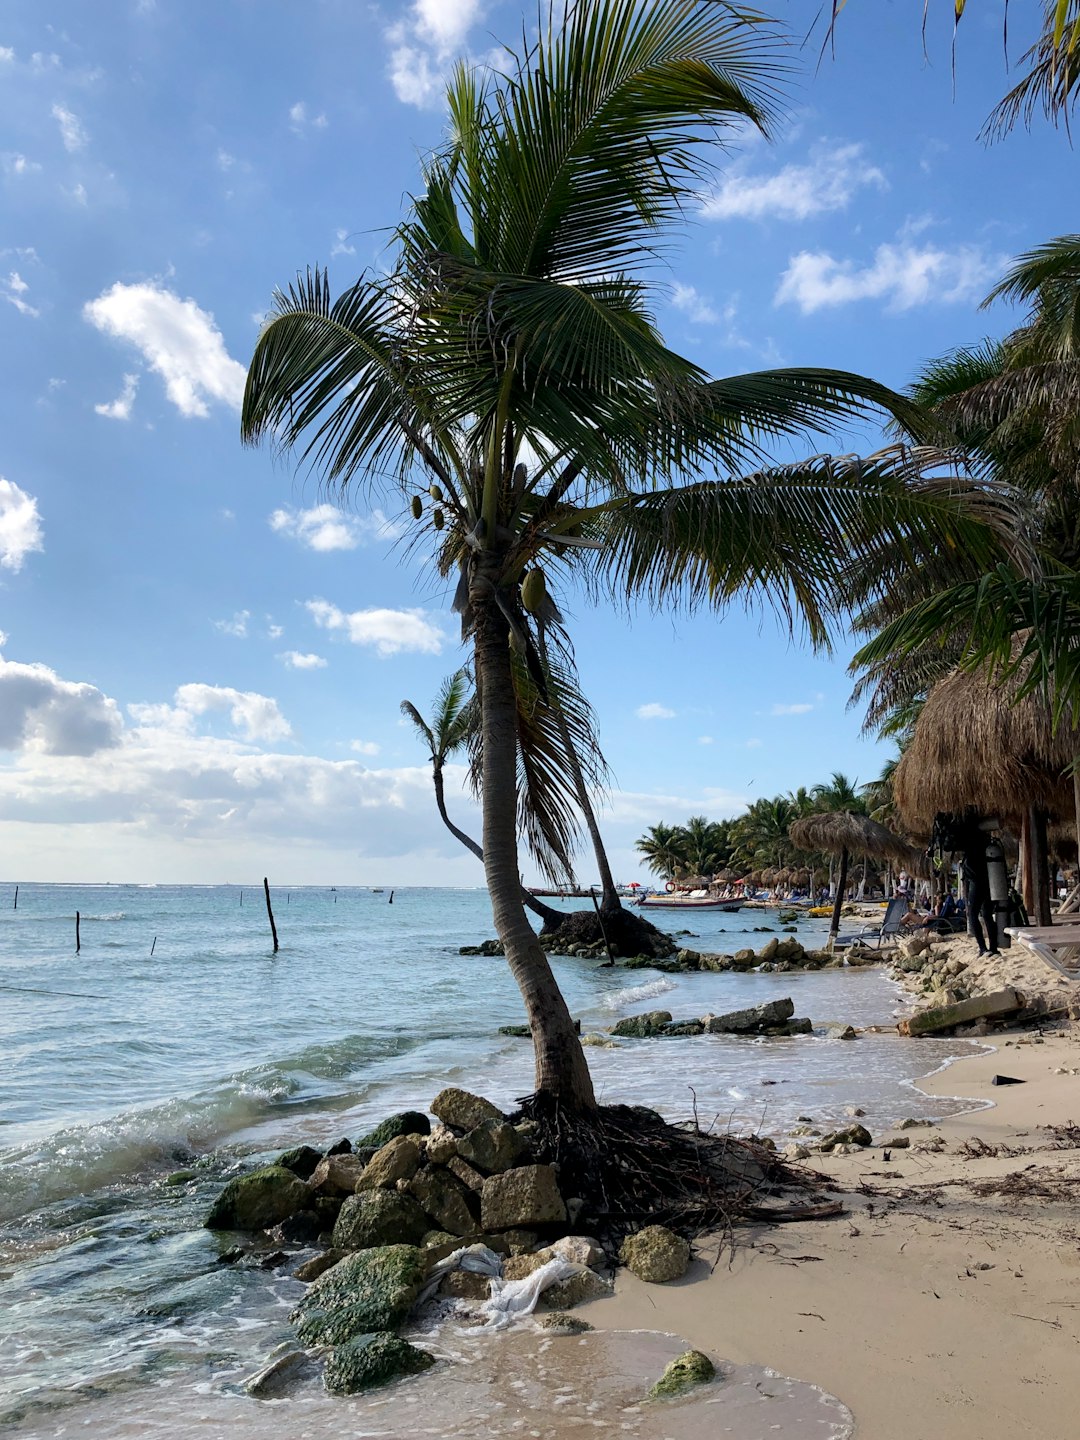 Travel Tips and Stories of Costa Maya in Mexico